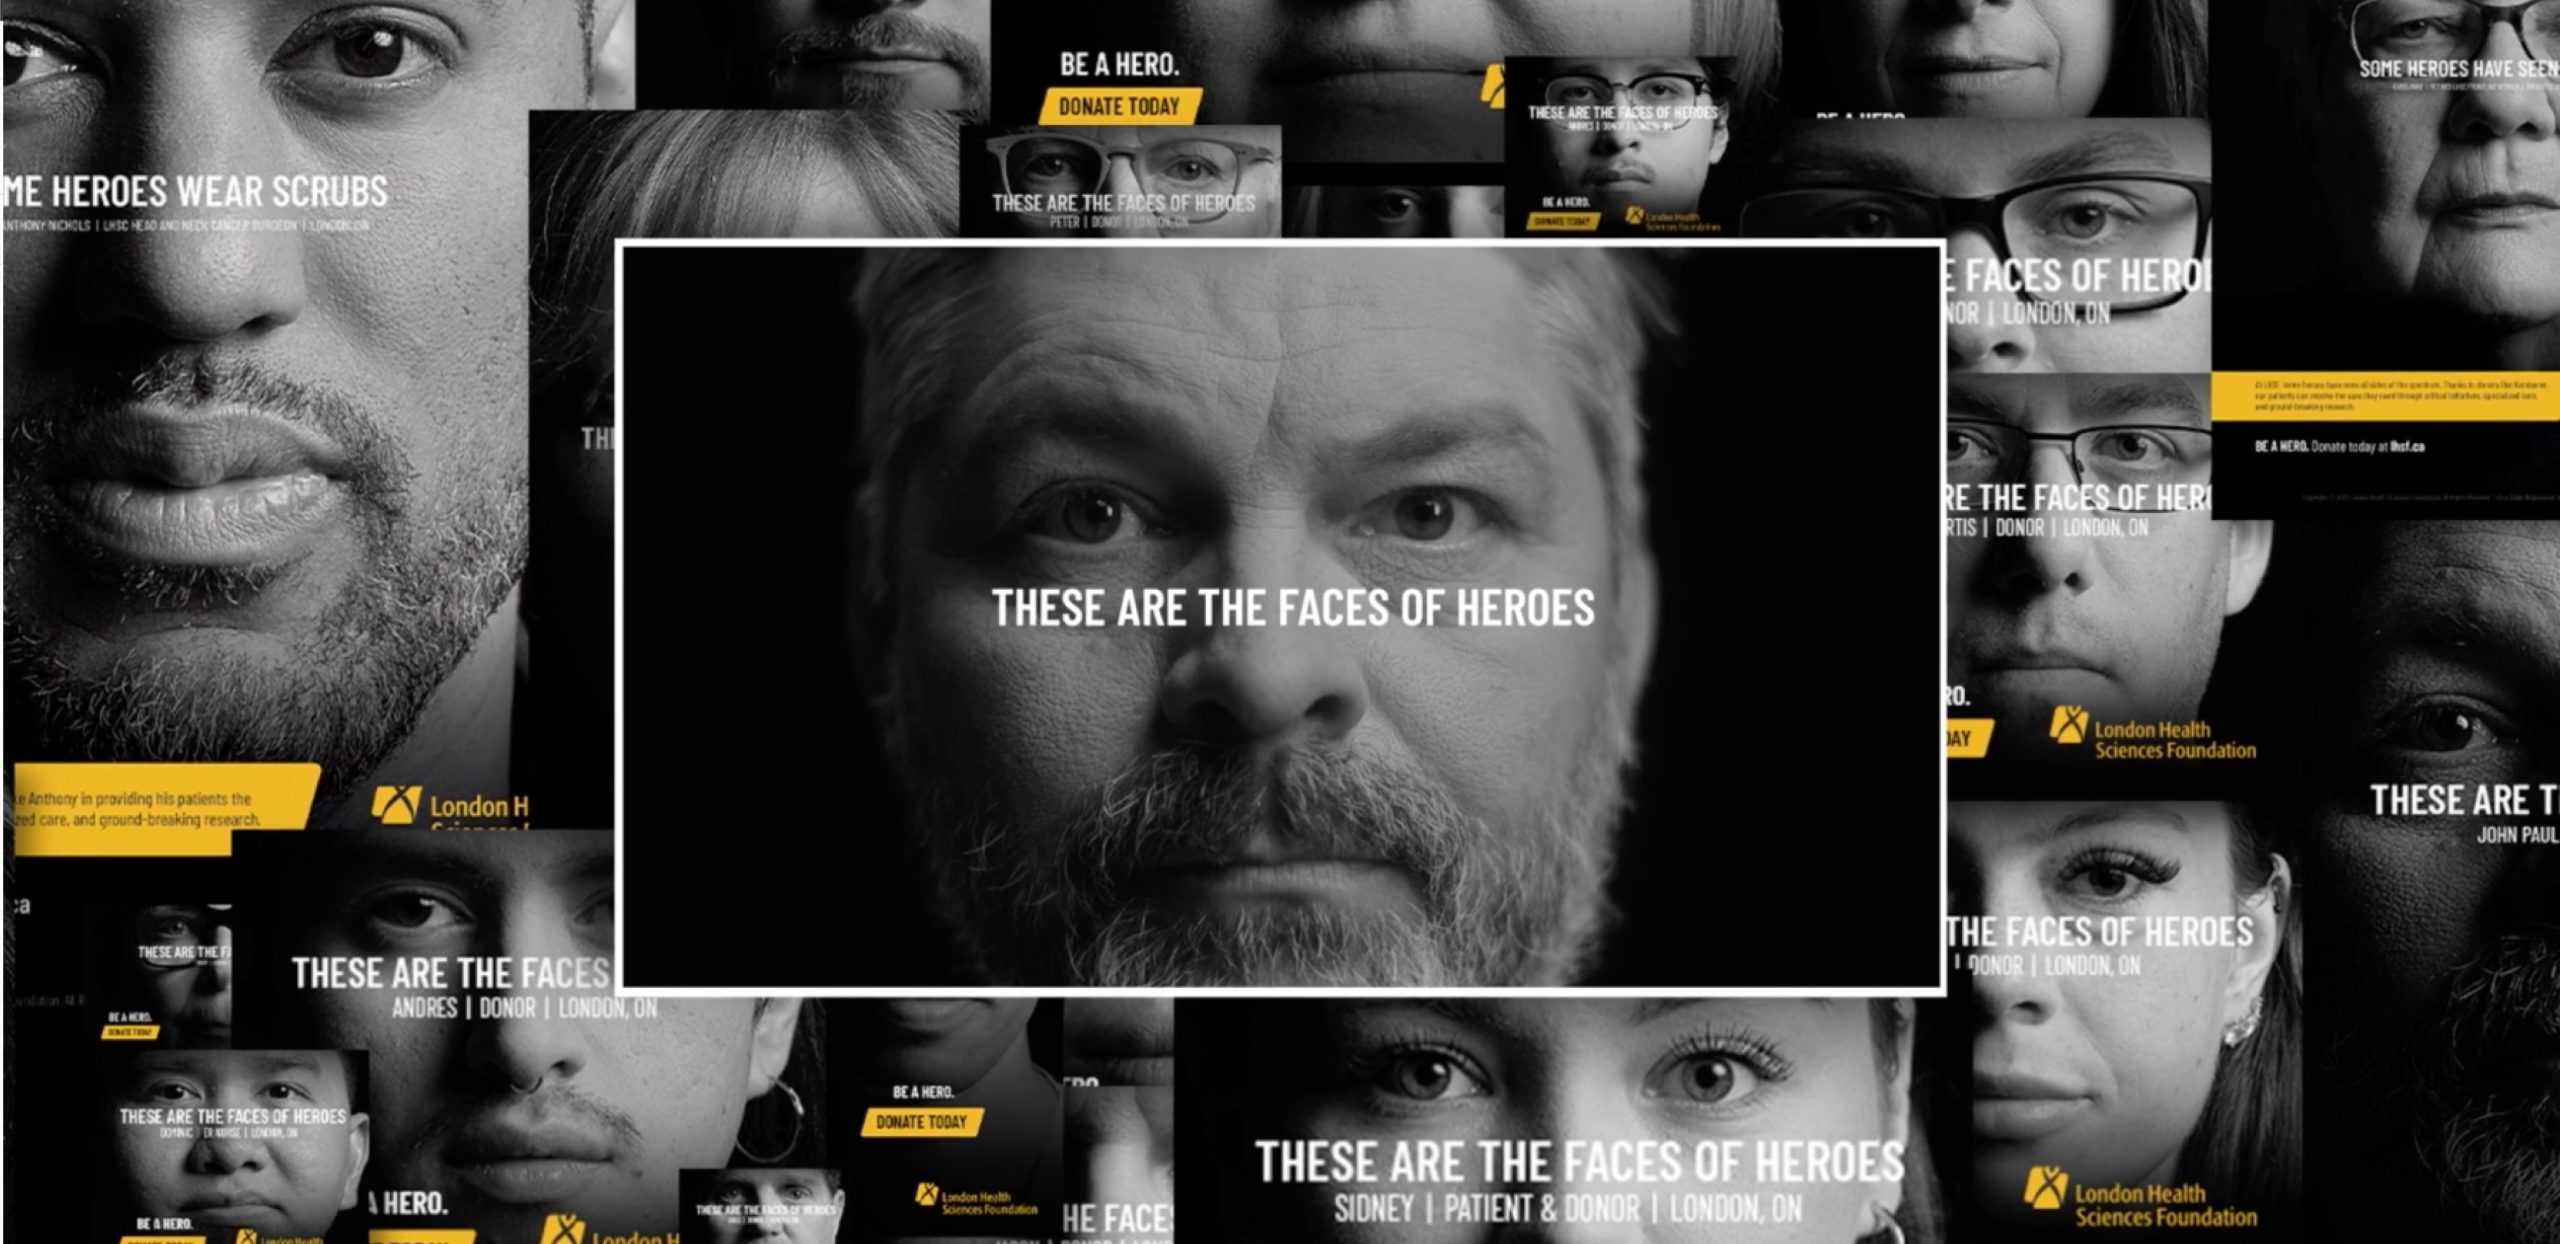 of multiple images of head shots of adults with varying text related to the Face of Heros campaign